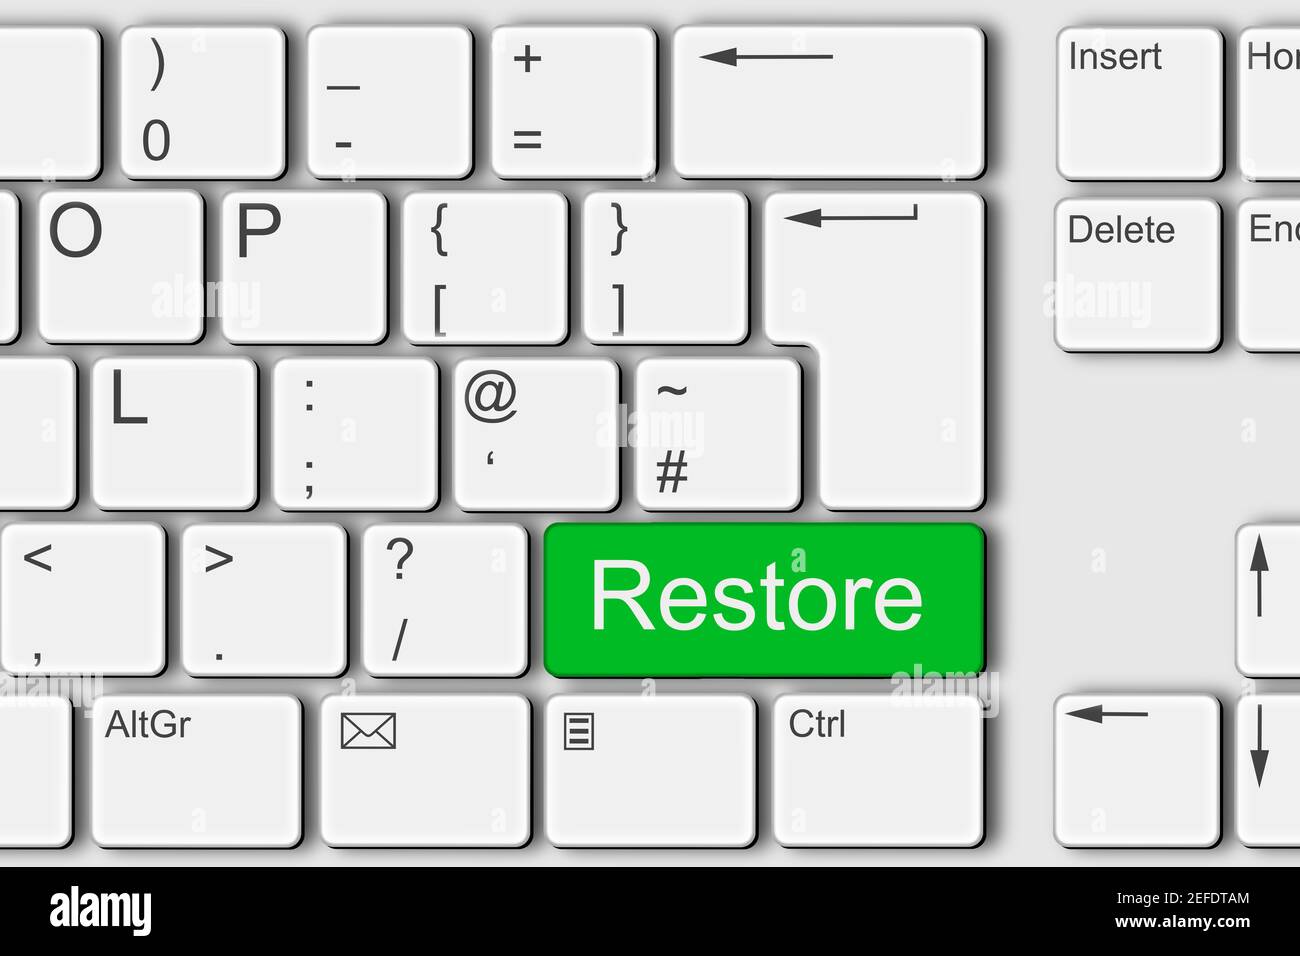 Restore concept PC computer keyboard 3d illustration Stock Photo